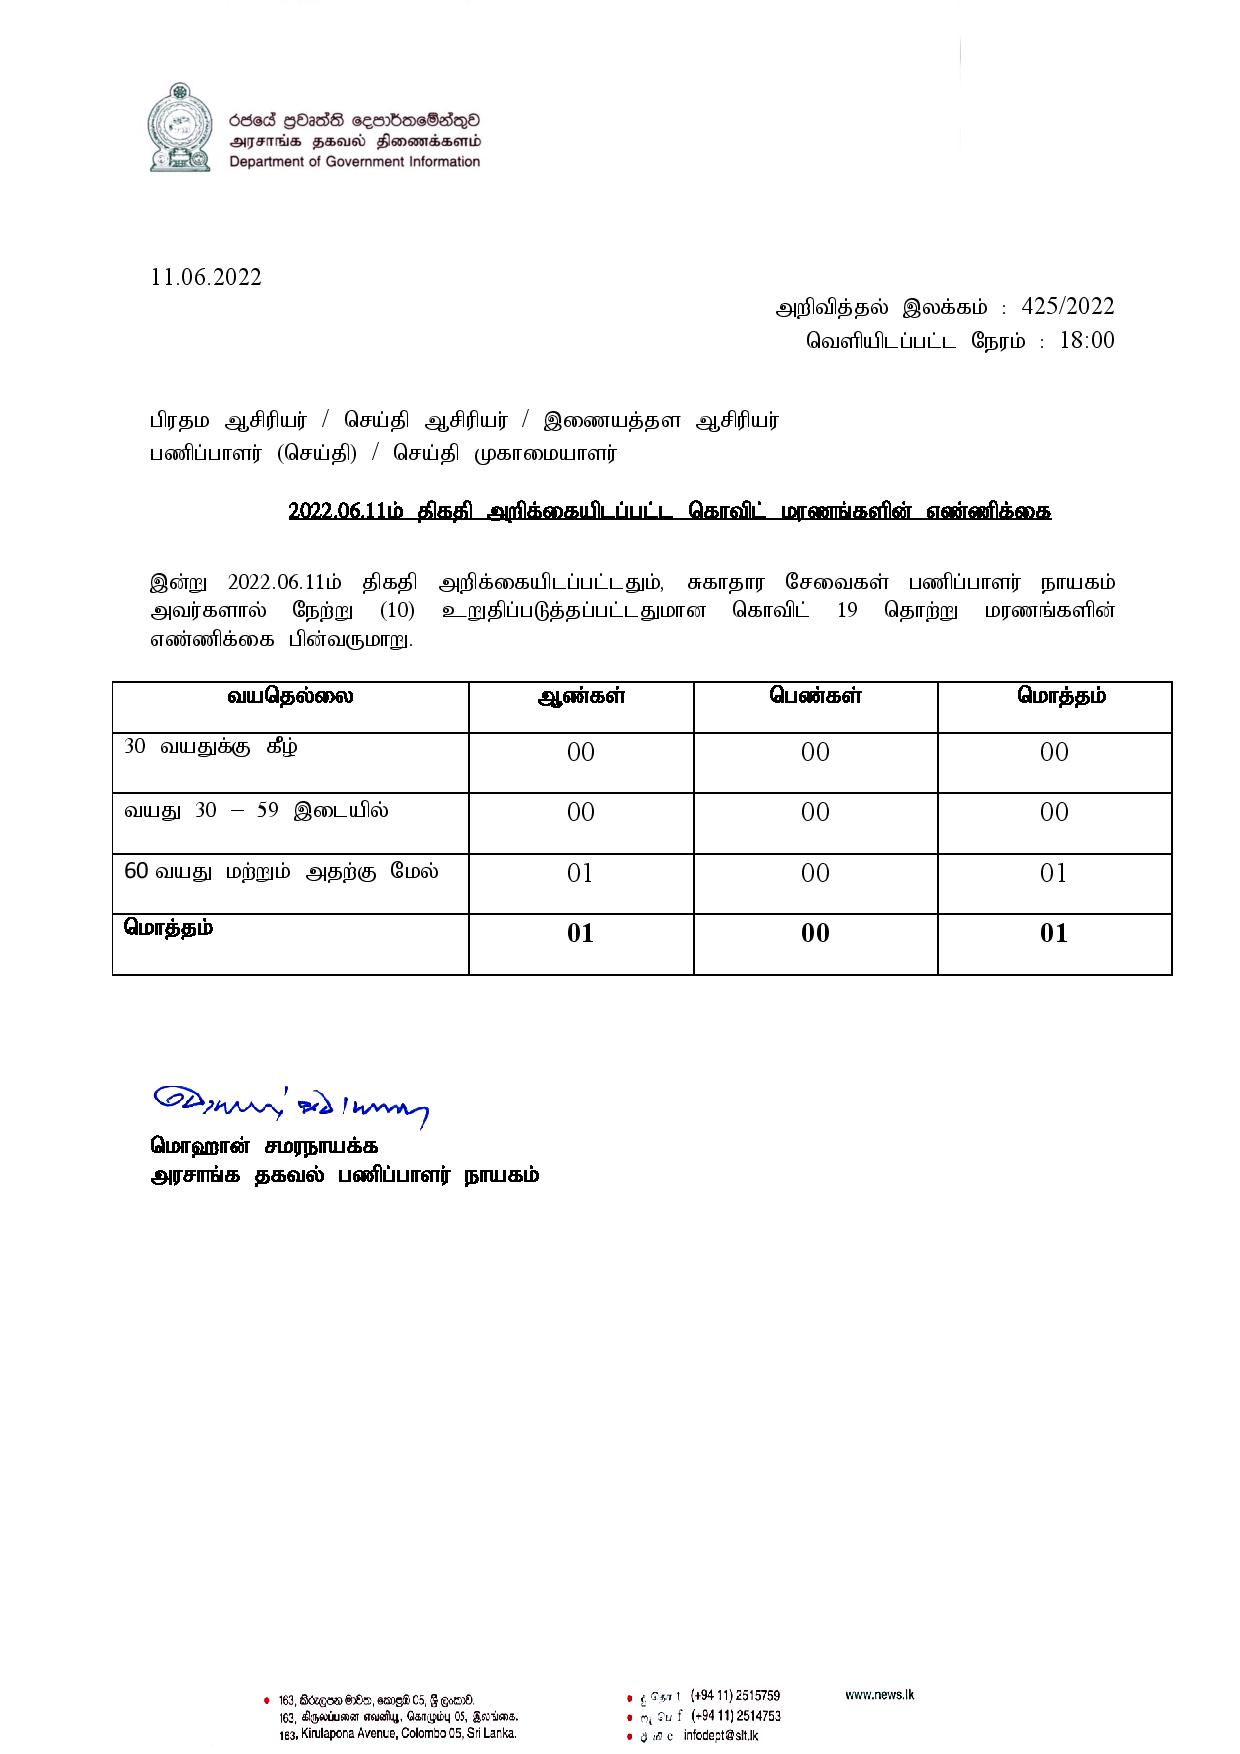 Release No 425 Tamil page 001